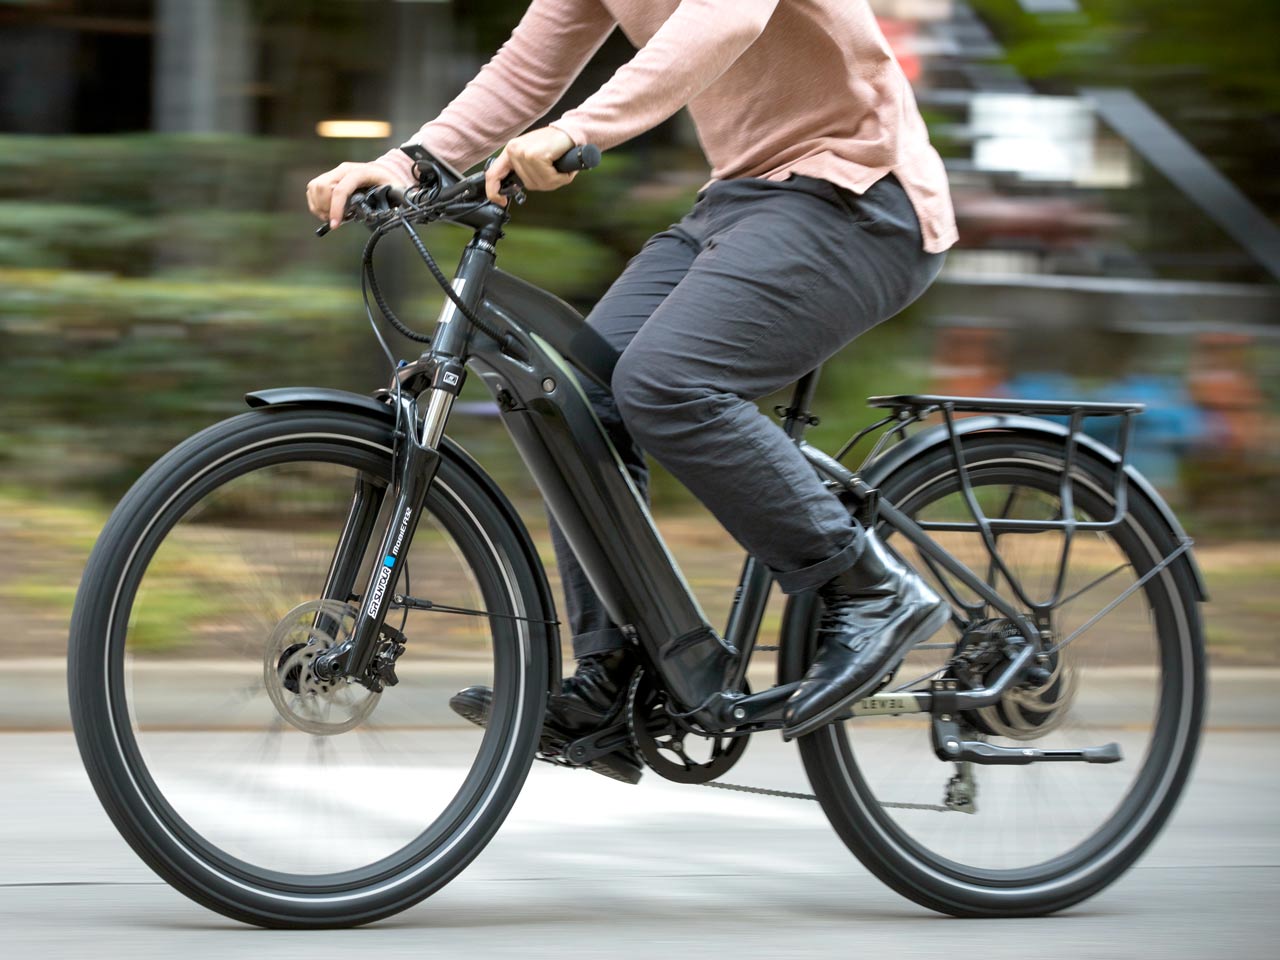 The Aventon Level Electric Bicycle